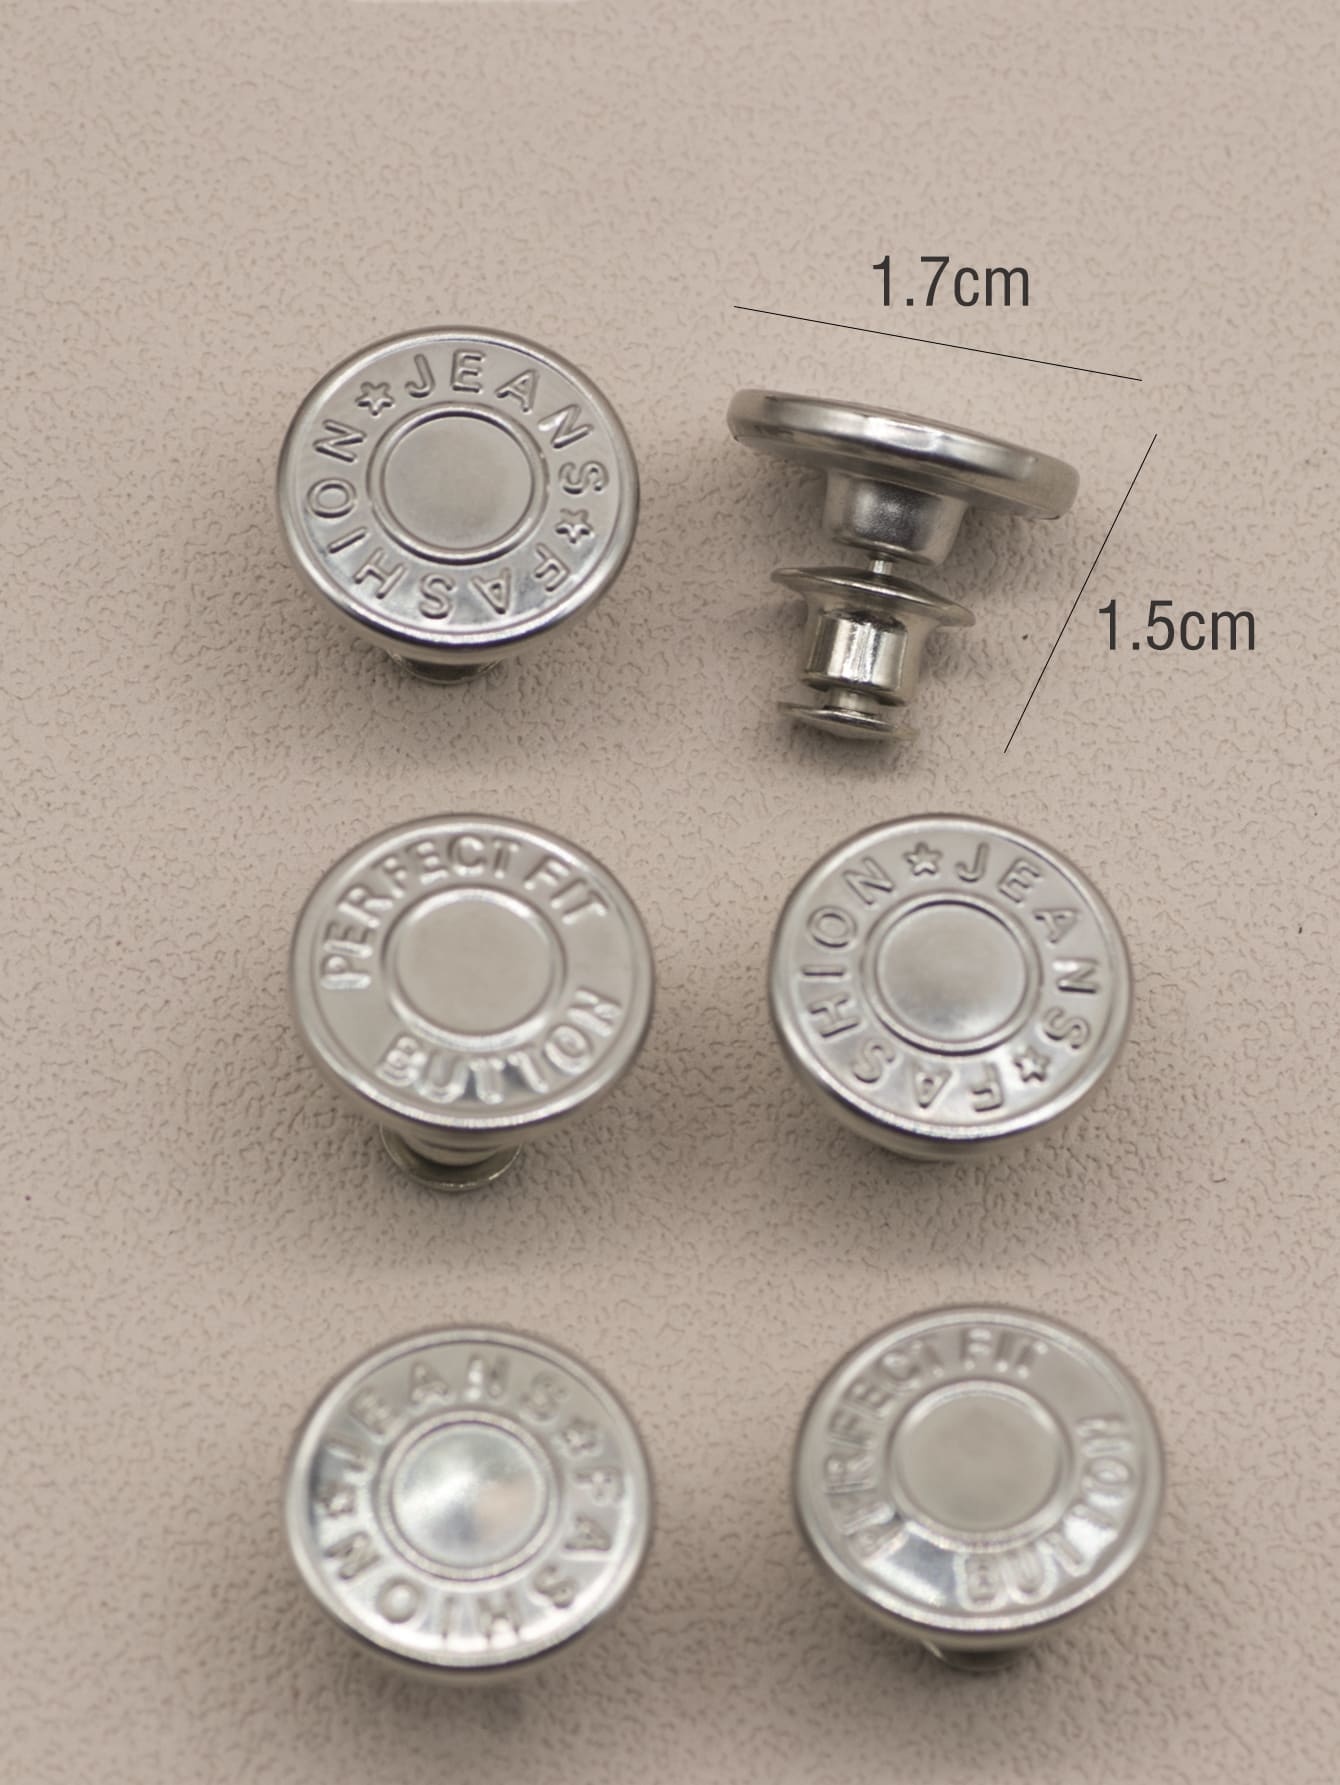 6 pcs Jeans Buttons Replacement 17mm No Sewing Metal Button Repair Kit Nailless Removable Jean Buttons Replacement Combo